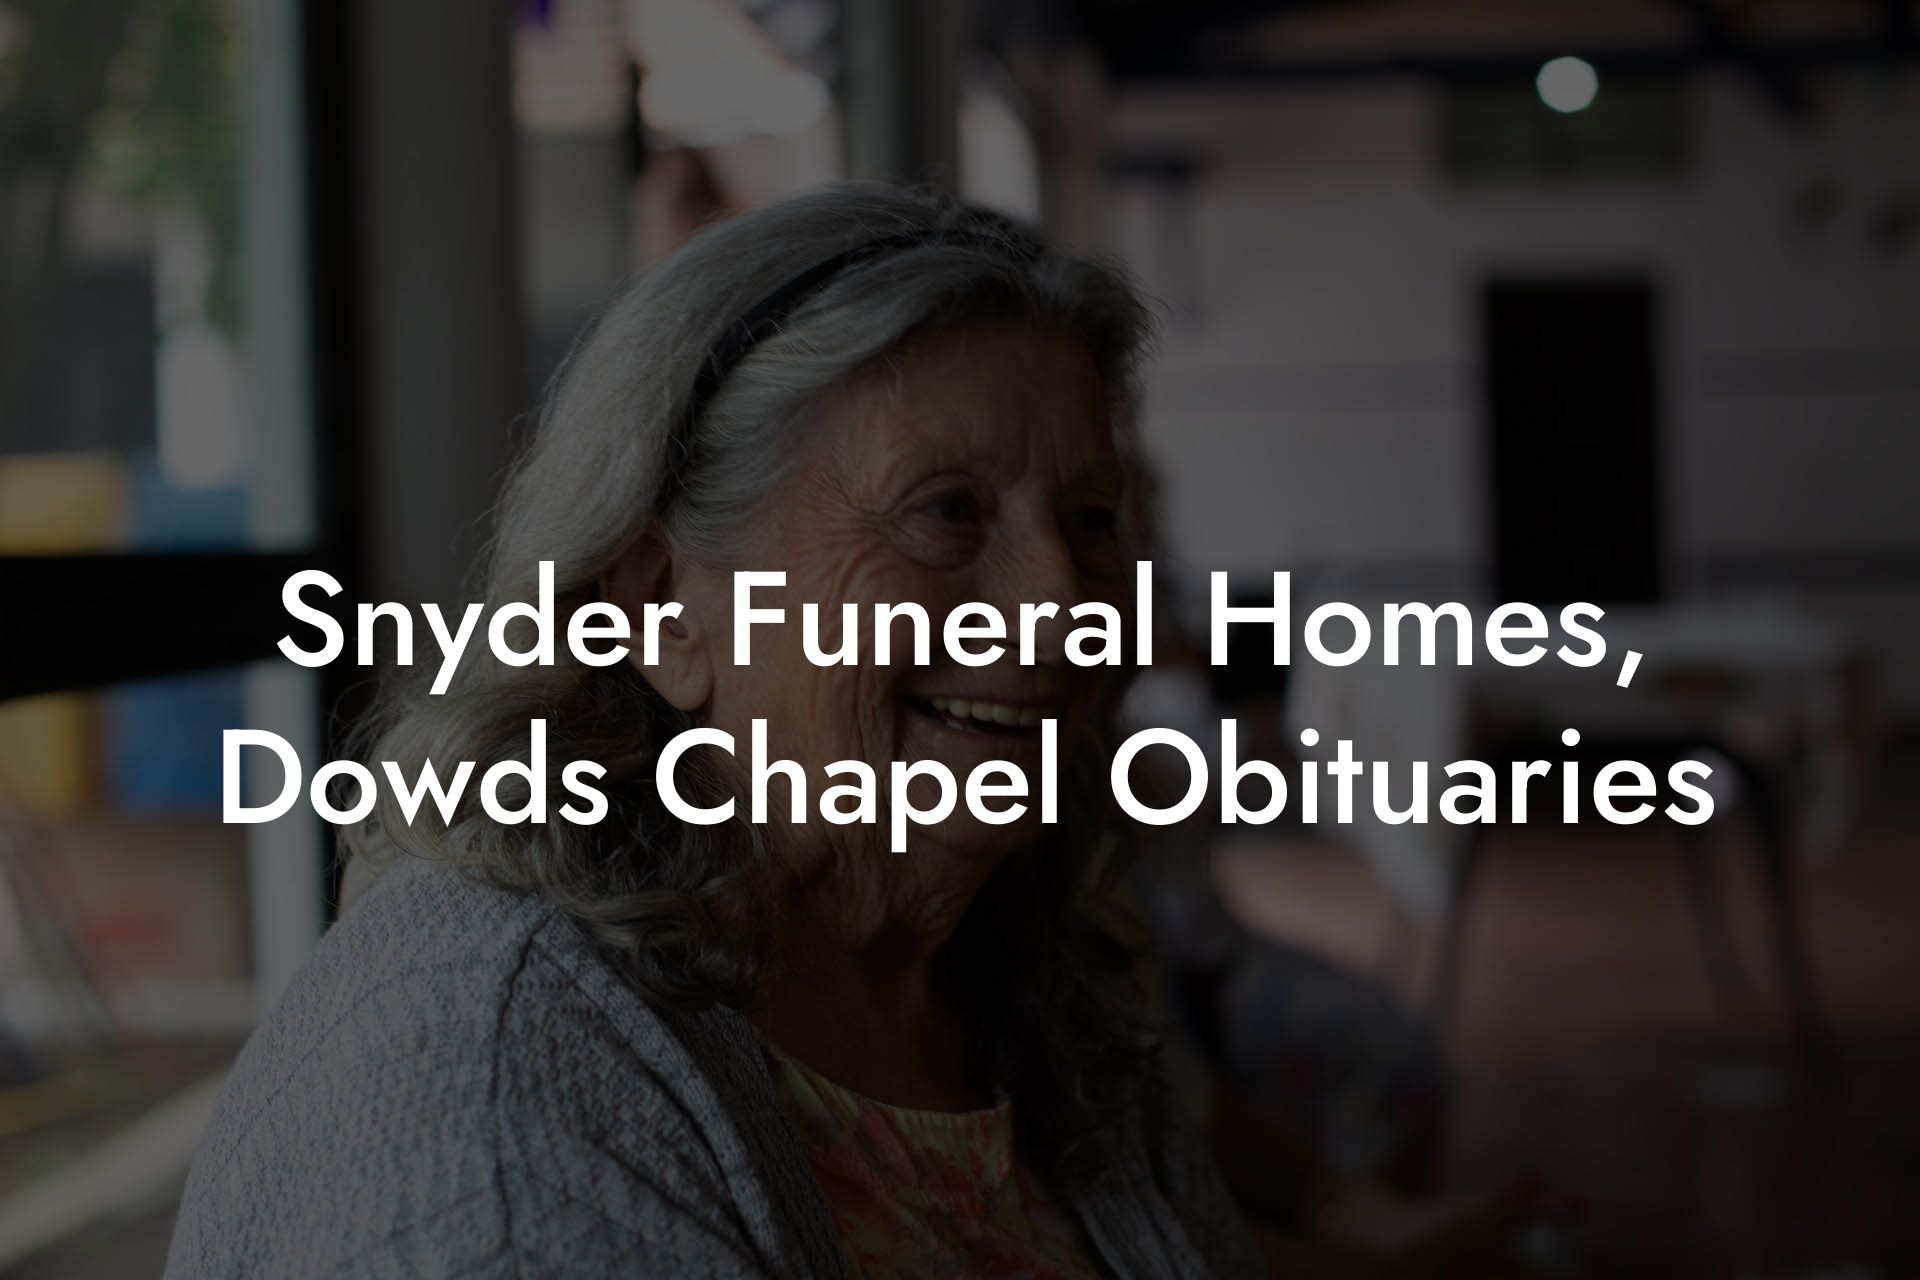 Snyder Funeral Homes, Dowds Chapel Obituaries